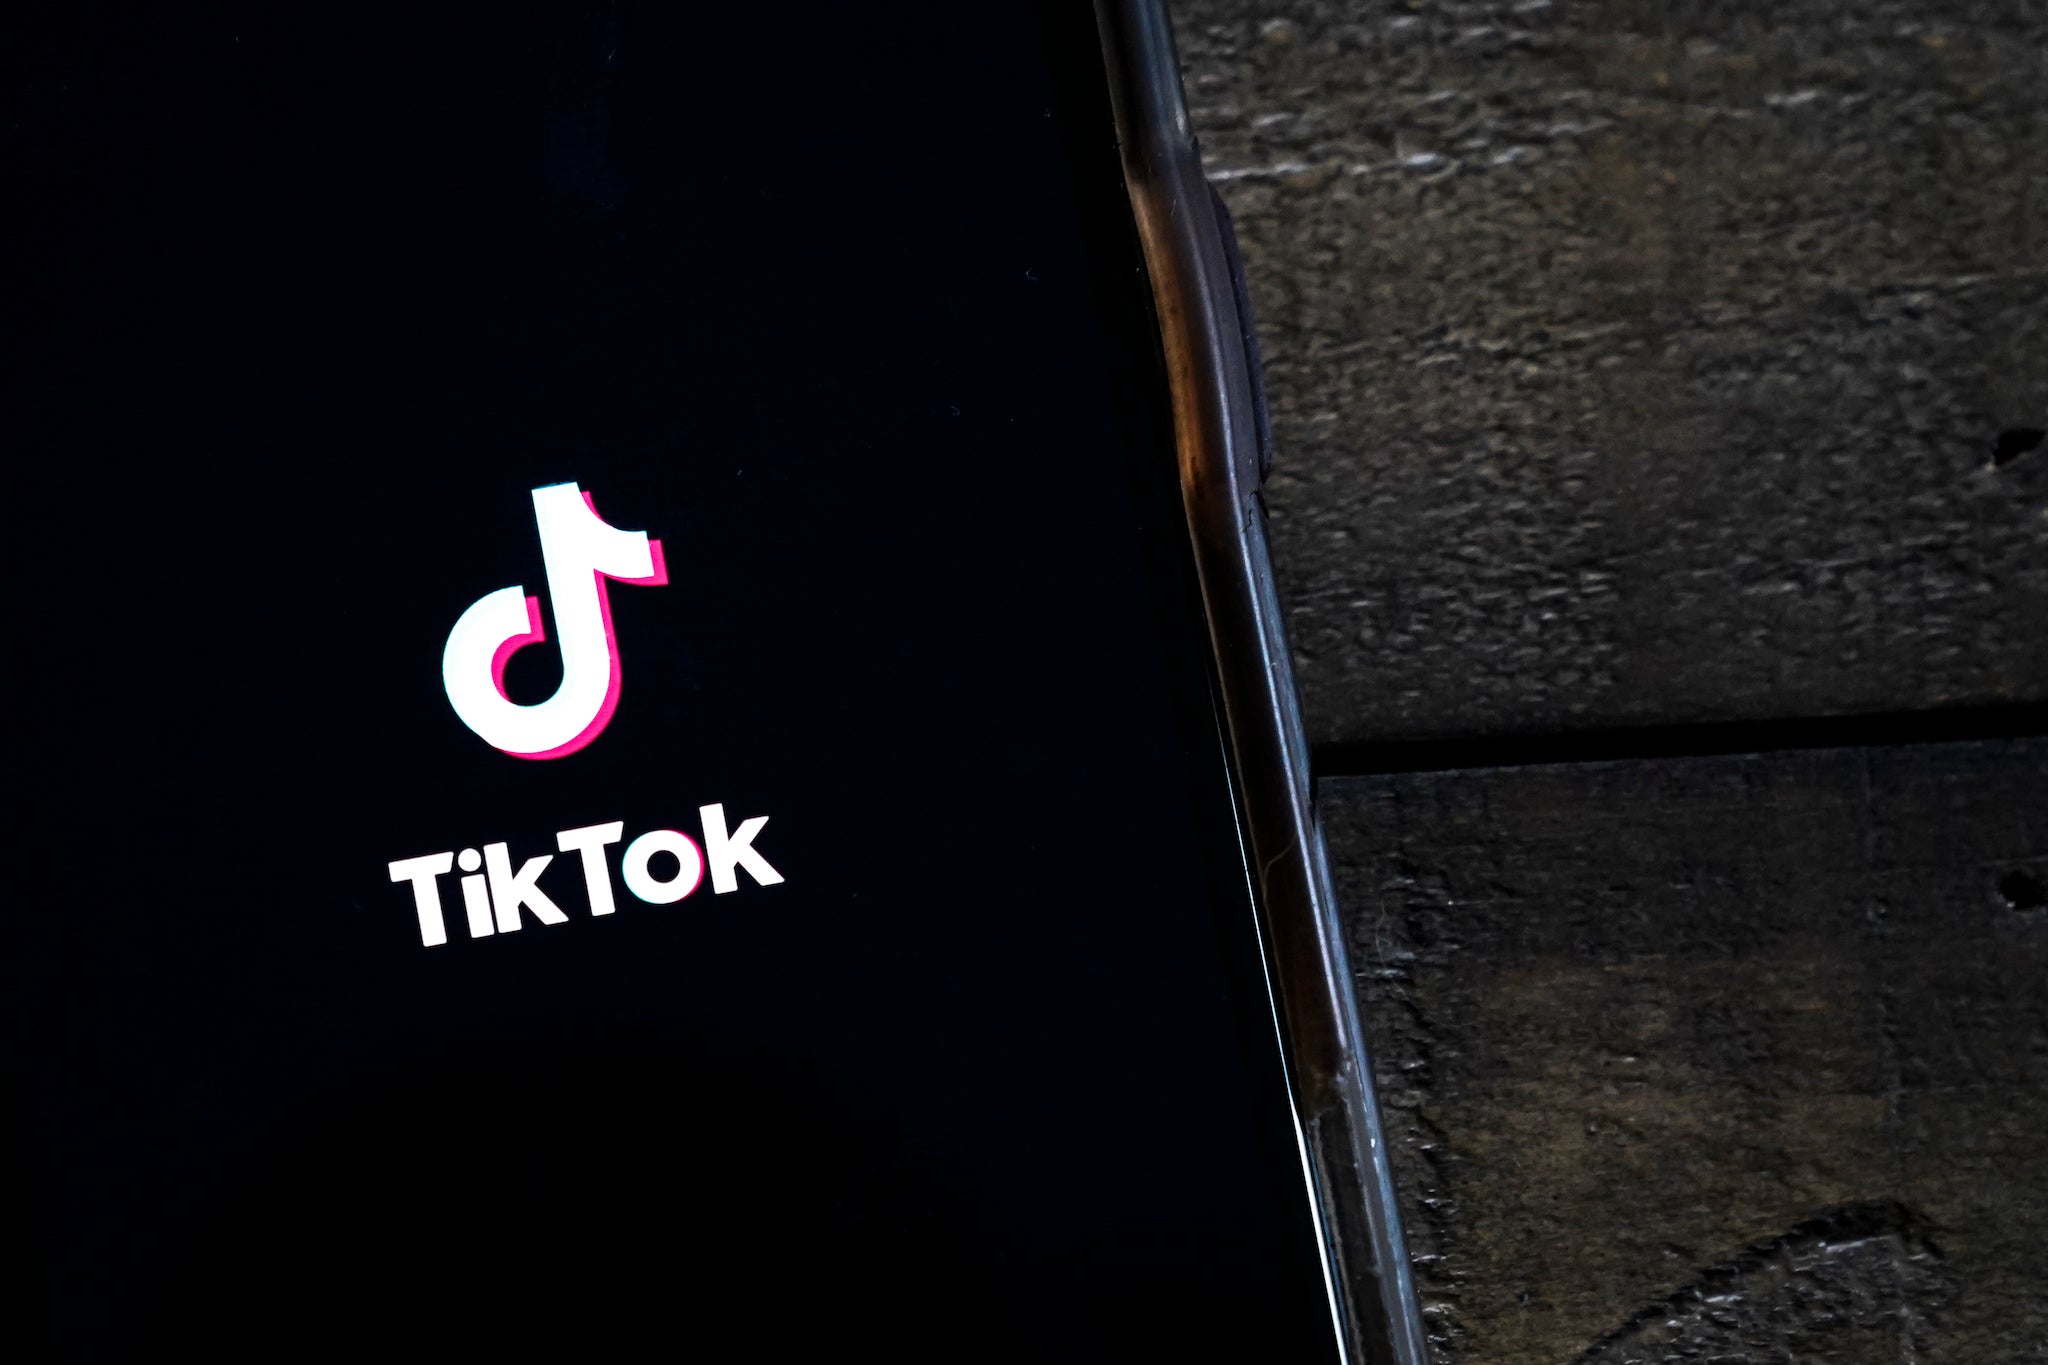 TikTok says they are working with law enforcement to investigate the threat